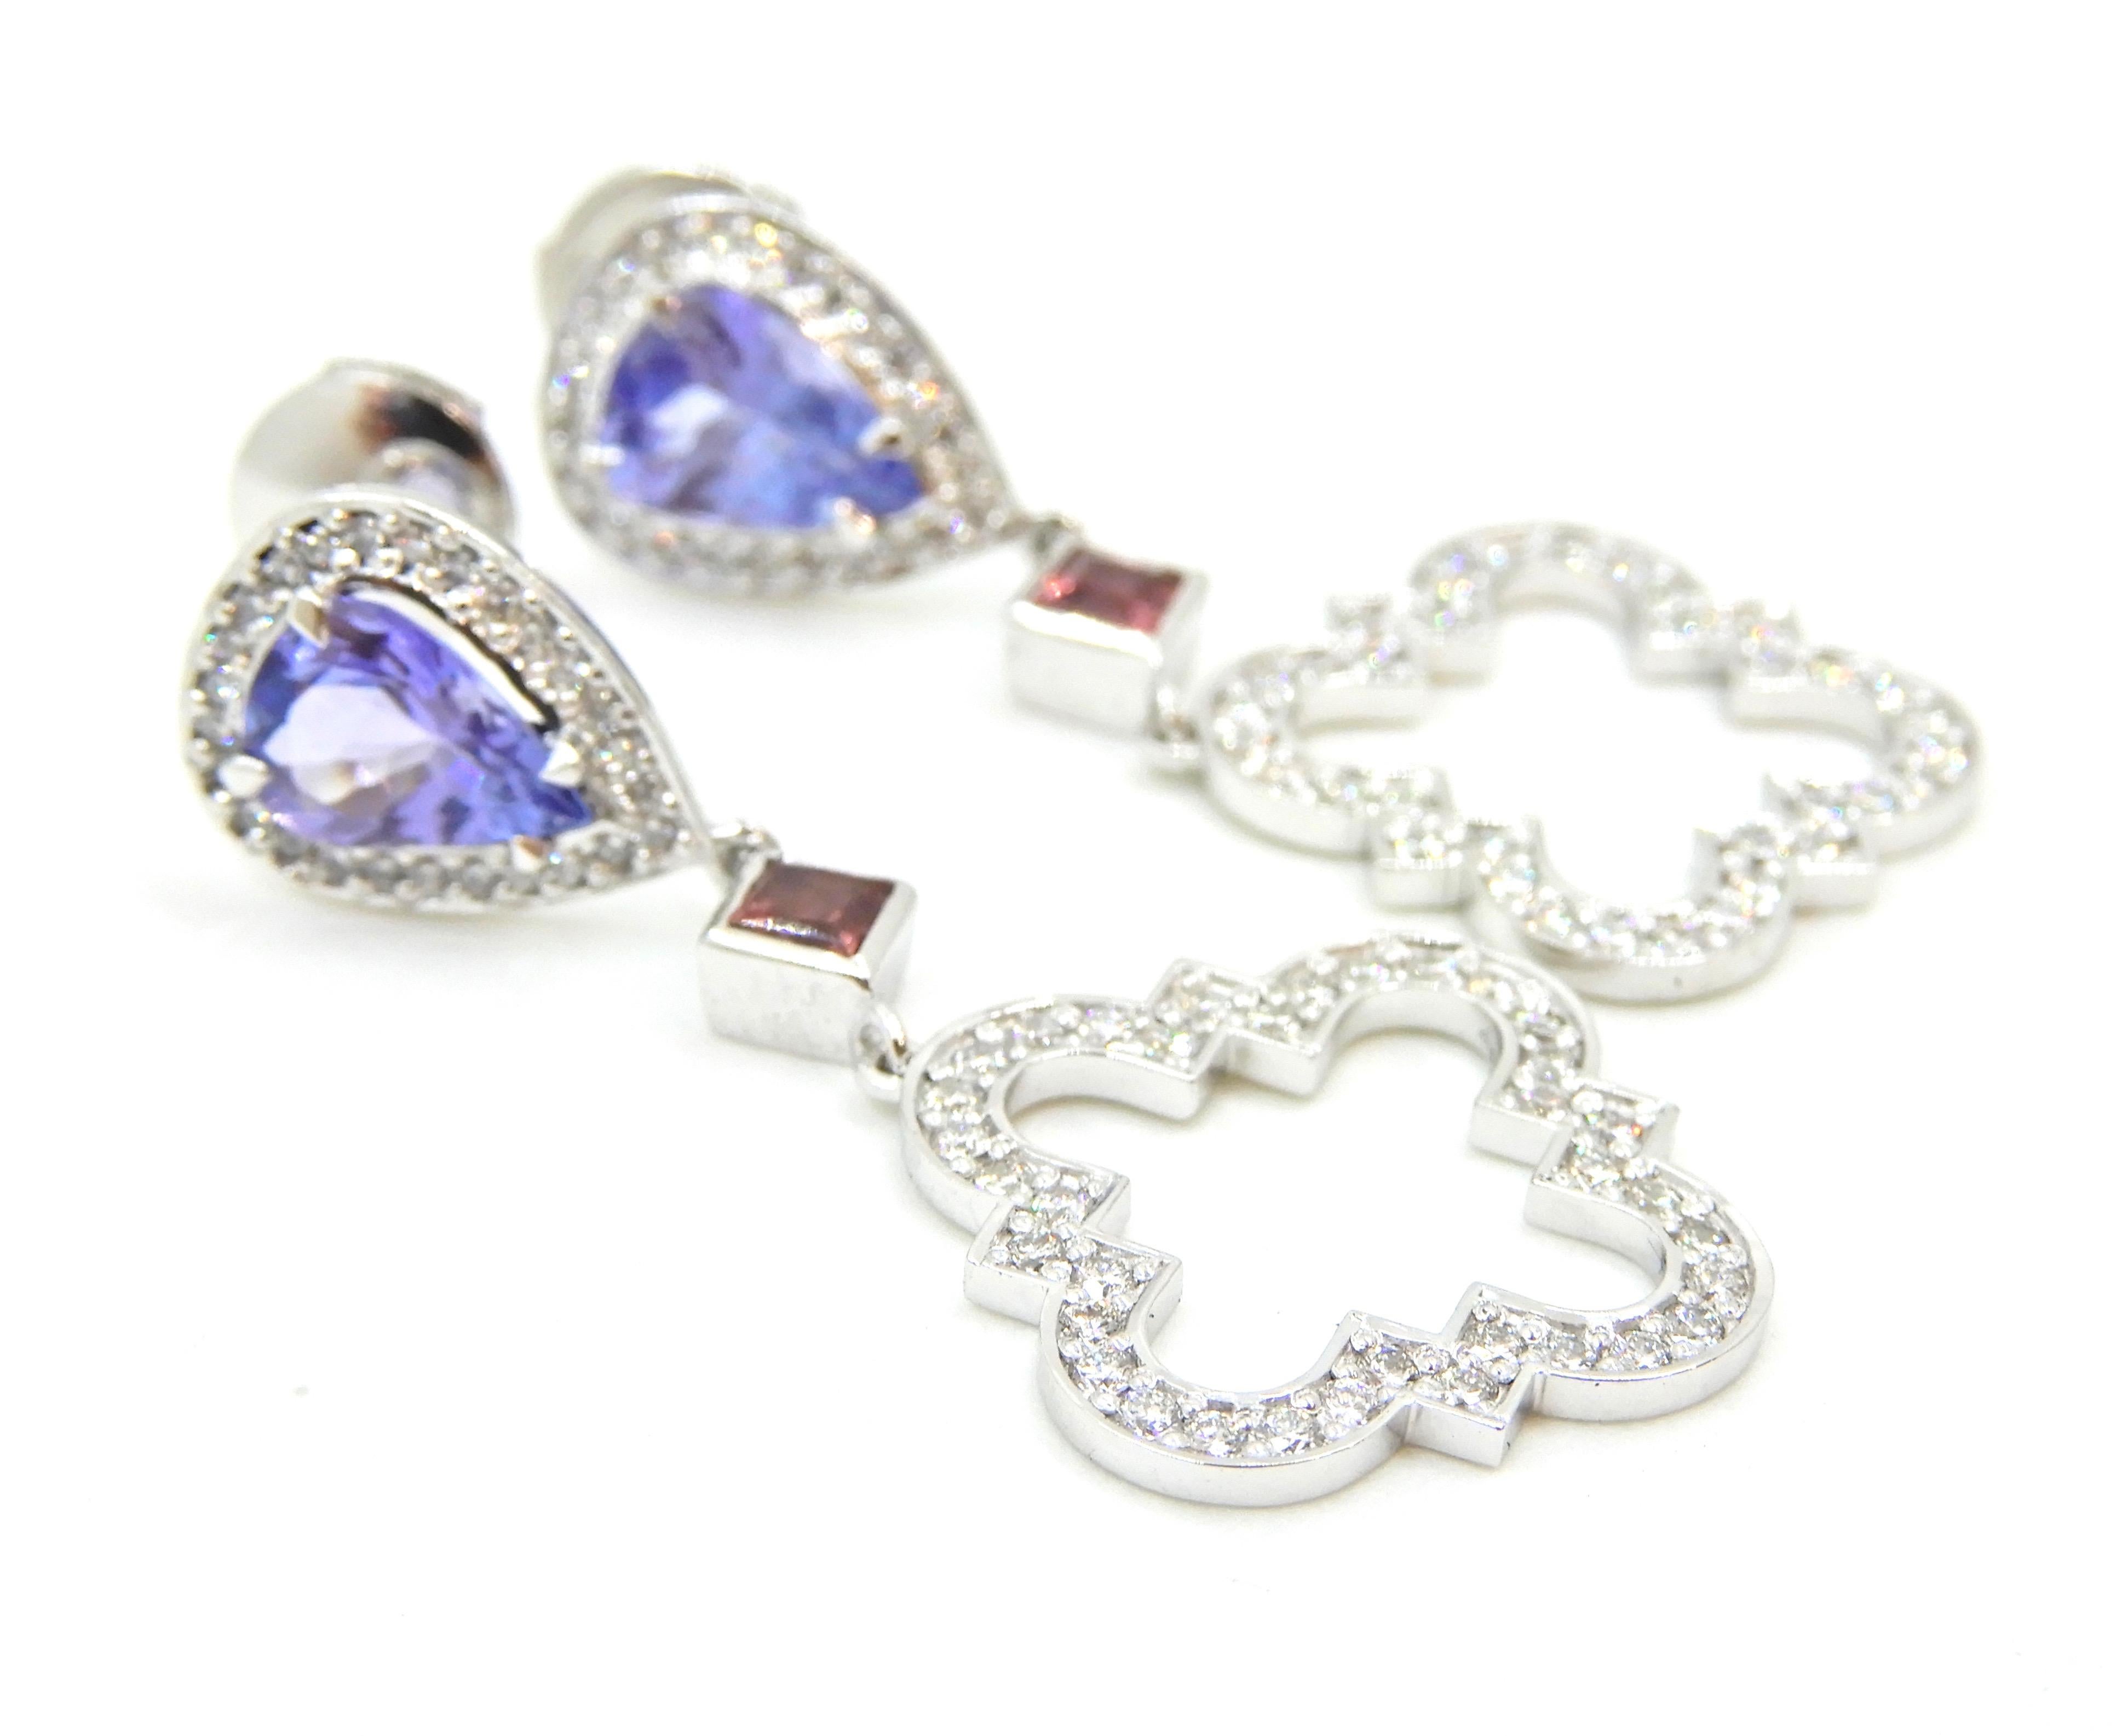 These stunning Tanzanite Pink Sapphire Diamond and 18 Carat White Gold Earrings will capture your imagination and heart.
Part of the Du Maroc collection, these earrings feature a stud comprising a claw set diamond halo around central 4 claw set pear